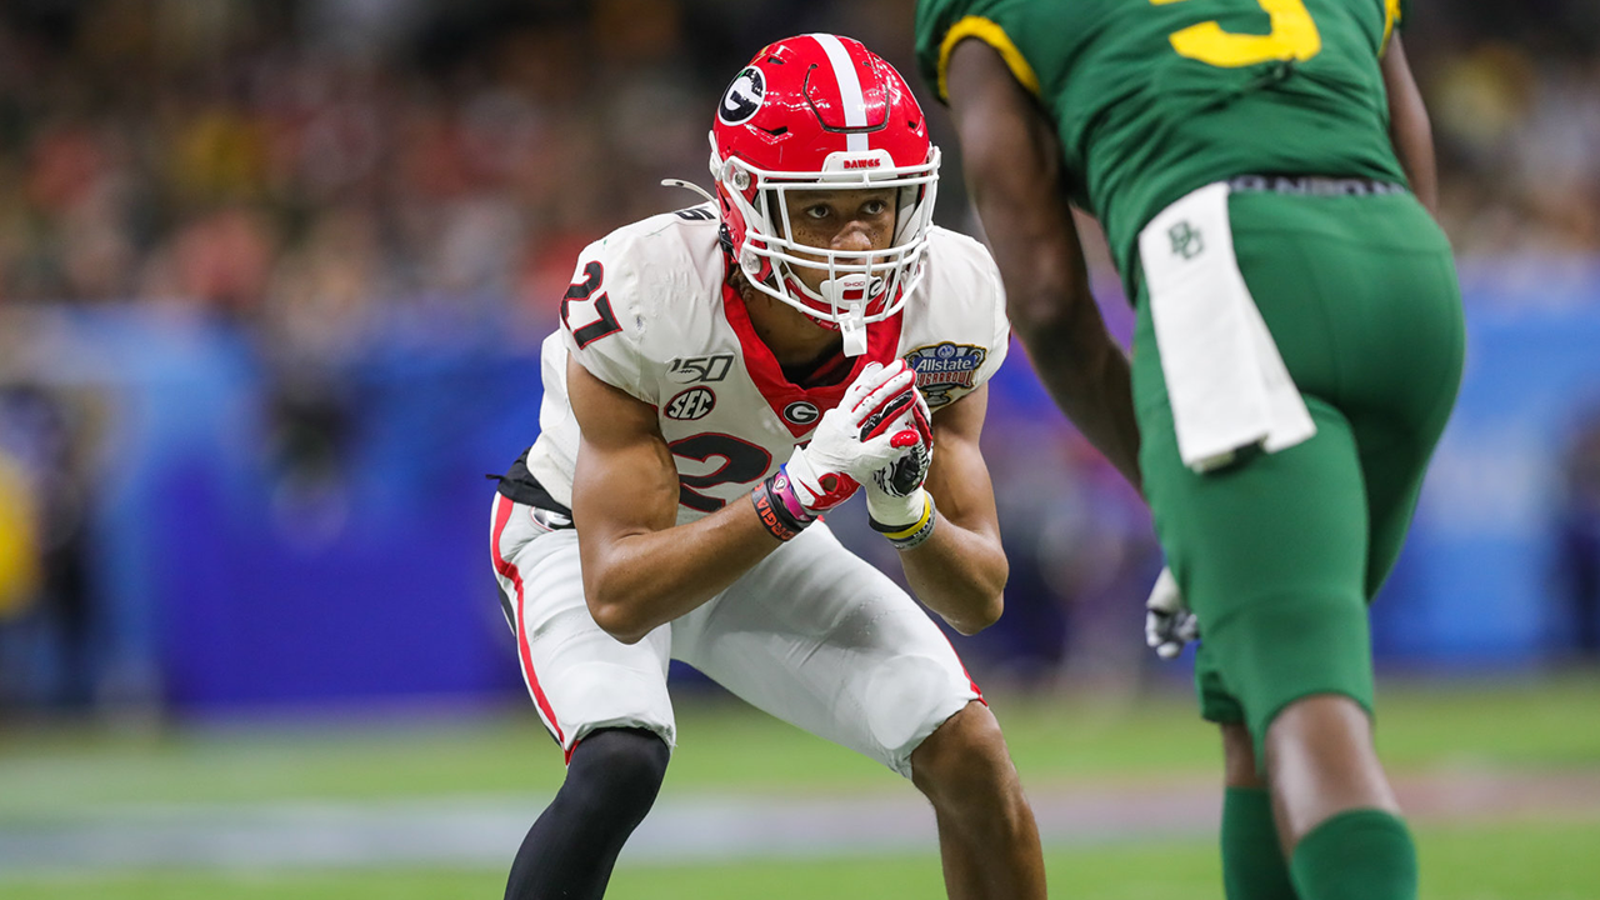 Packers select former Georgia CB Eric Stokes with the 29th overall pick